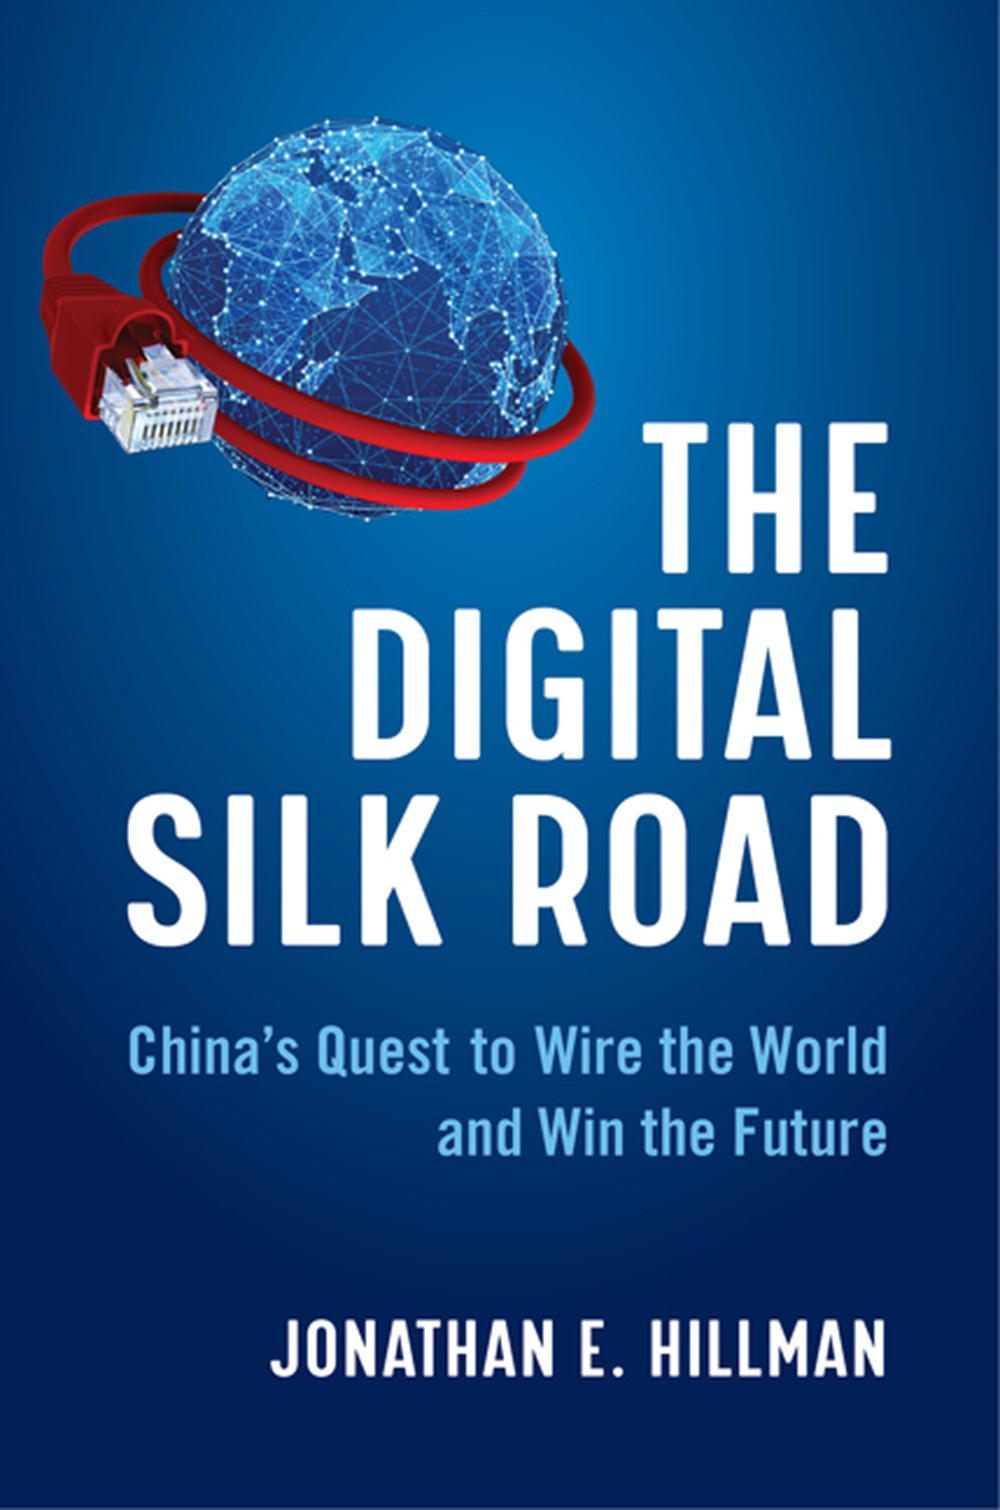 Digital Silk Road: China's Quest to Wire the World and Win the Future